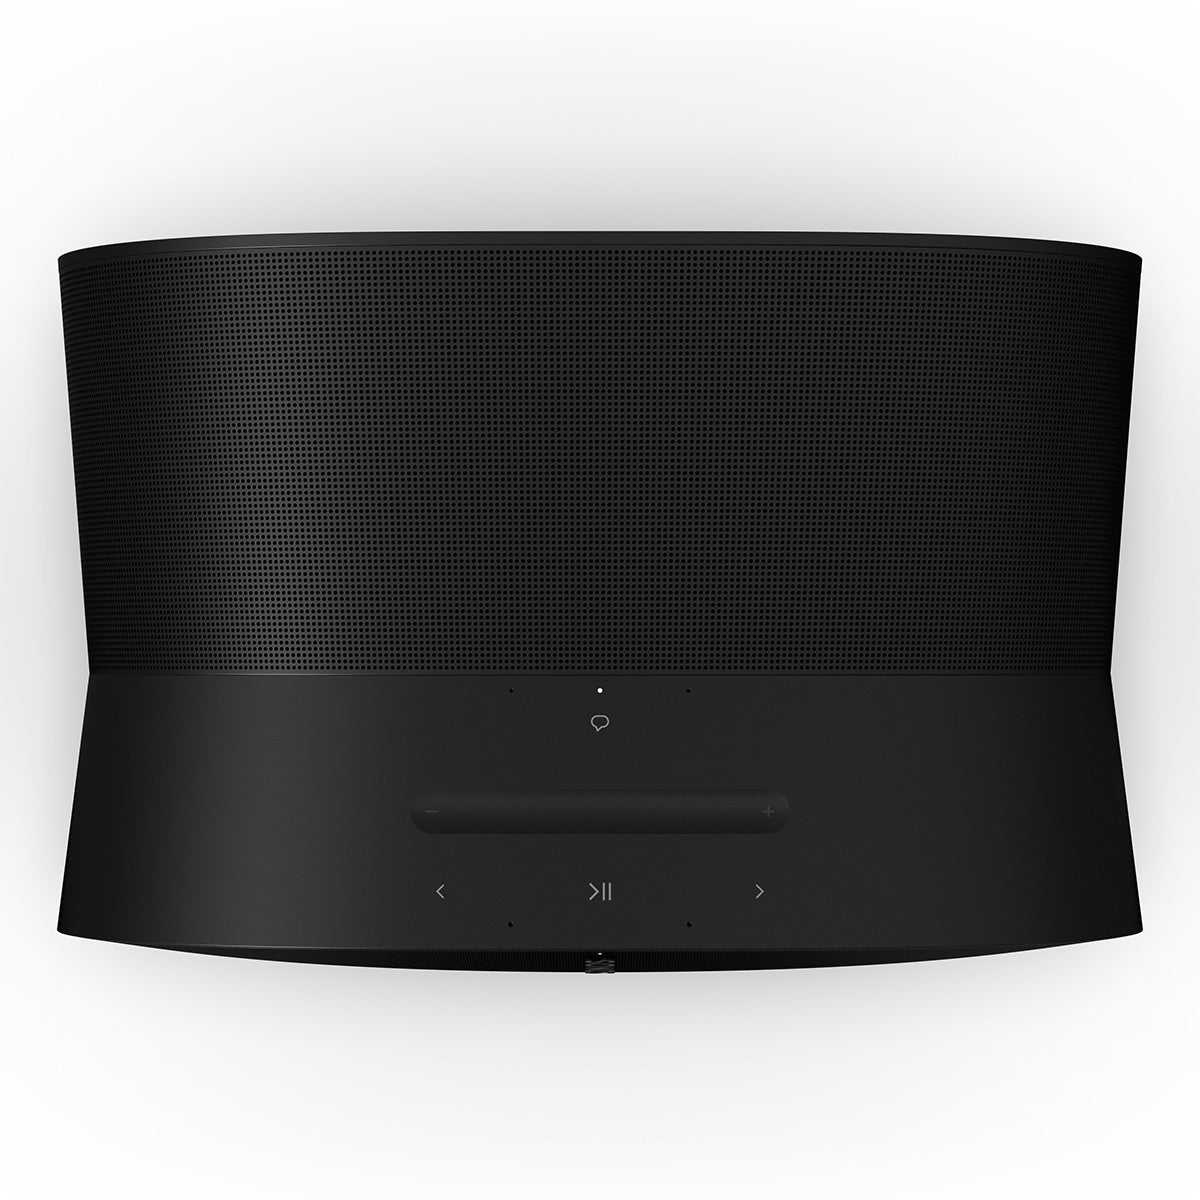 Sonos Era 300 Voice-Controlled Wireless Bluetooth Smart Speaker with Line-In 3.5mm to USB-C Adapter (Black)